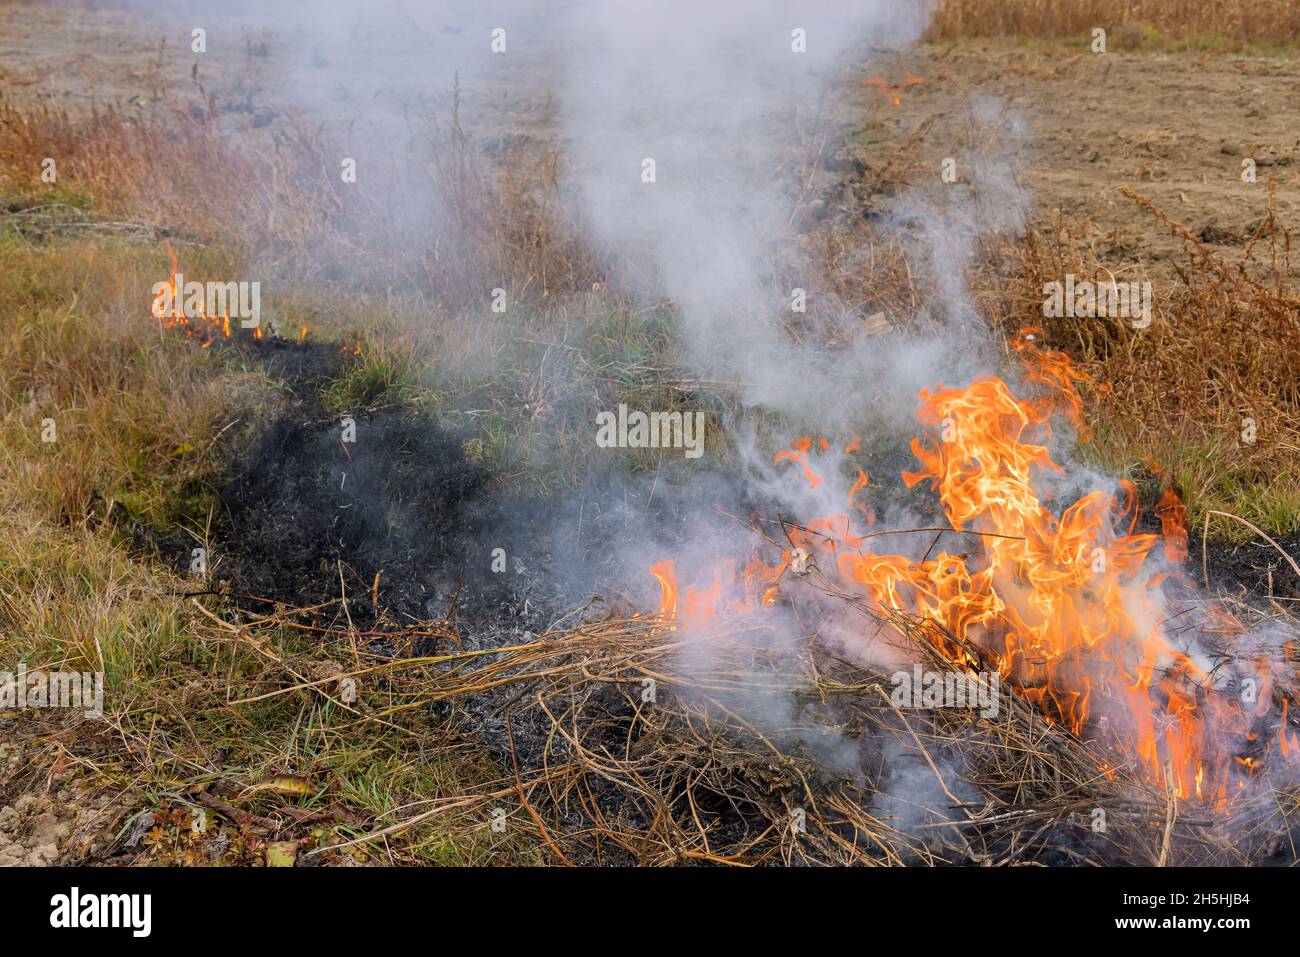 Smoke rise from fire of dry grass burning in a garden refuse during autumn cleaning period work Stock Photo